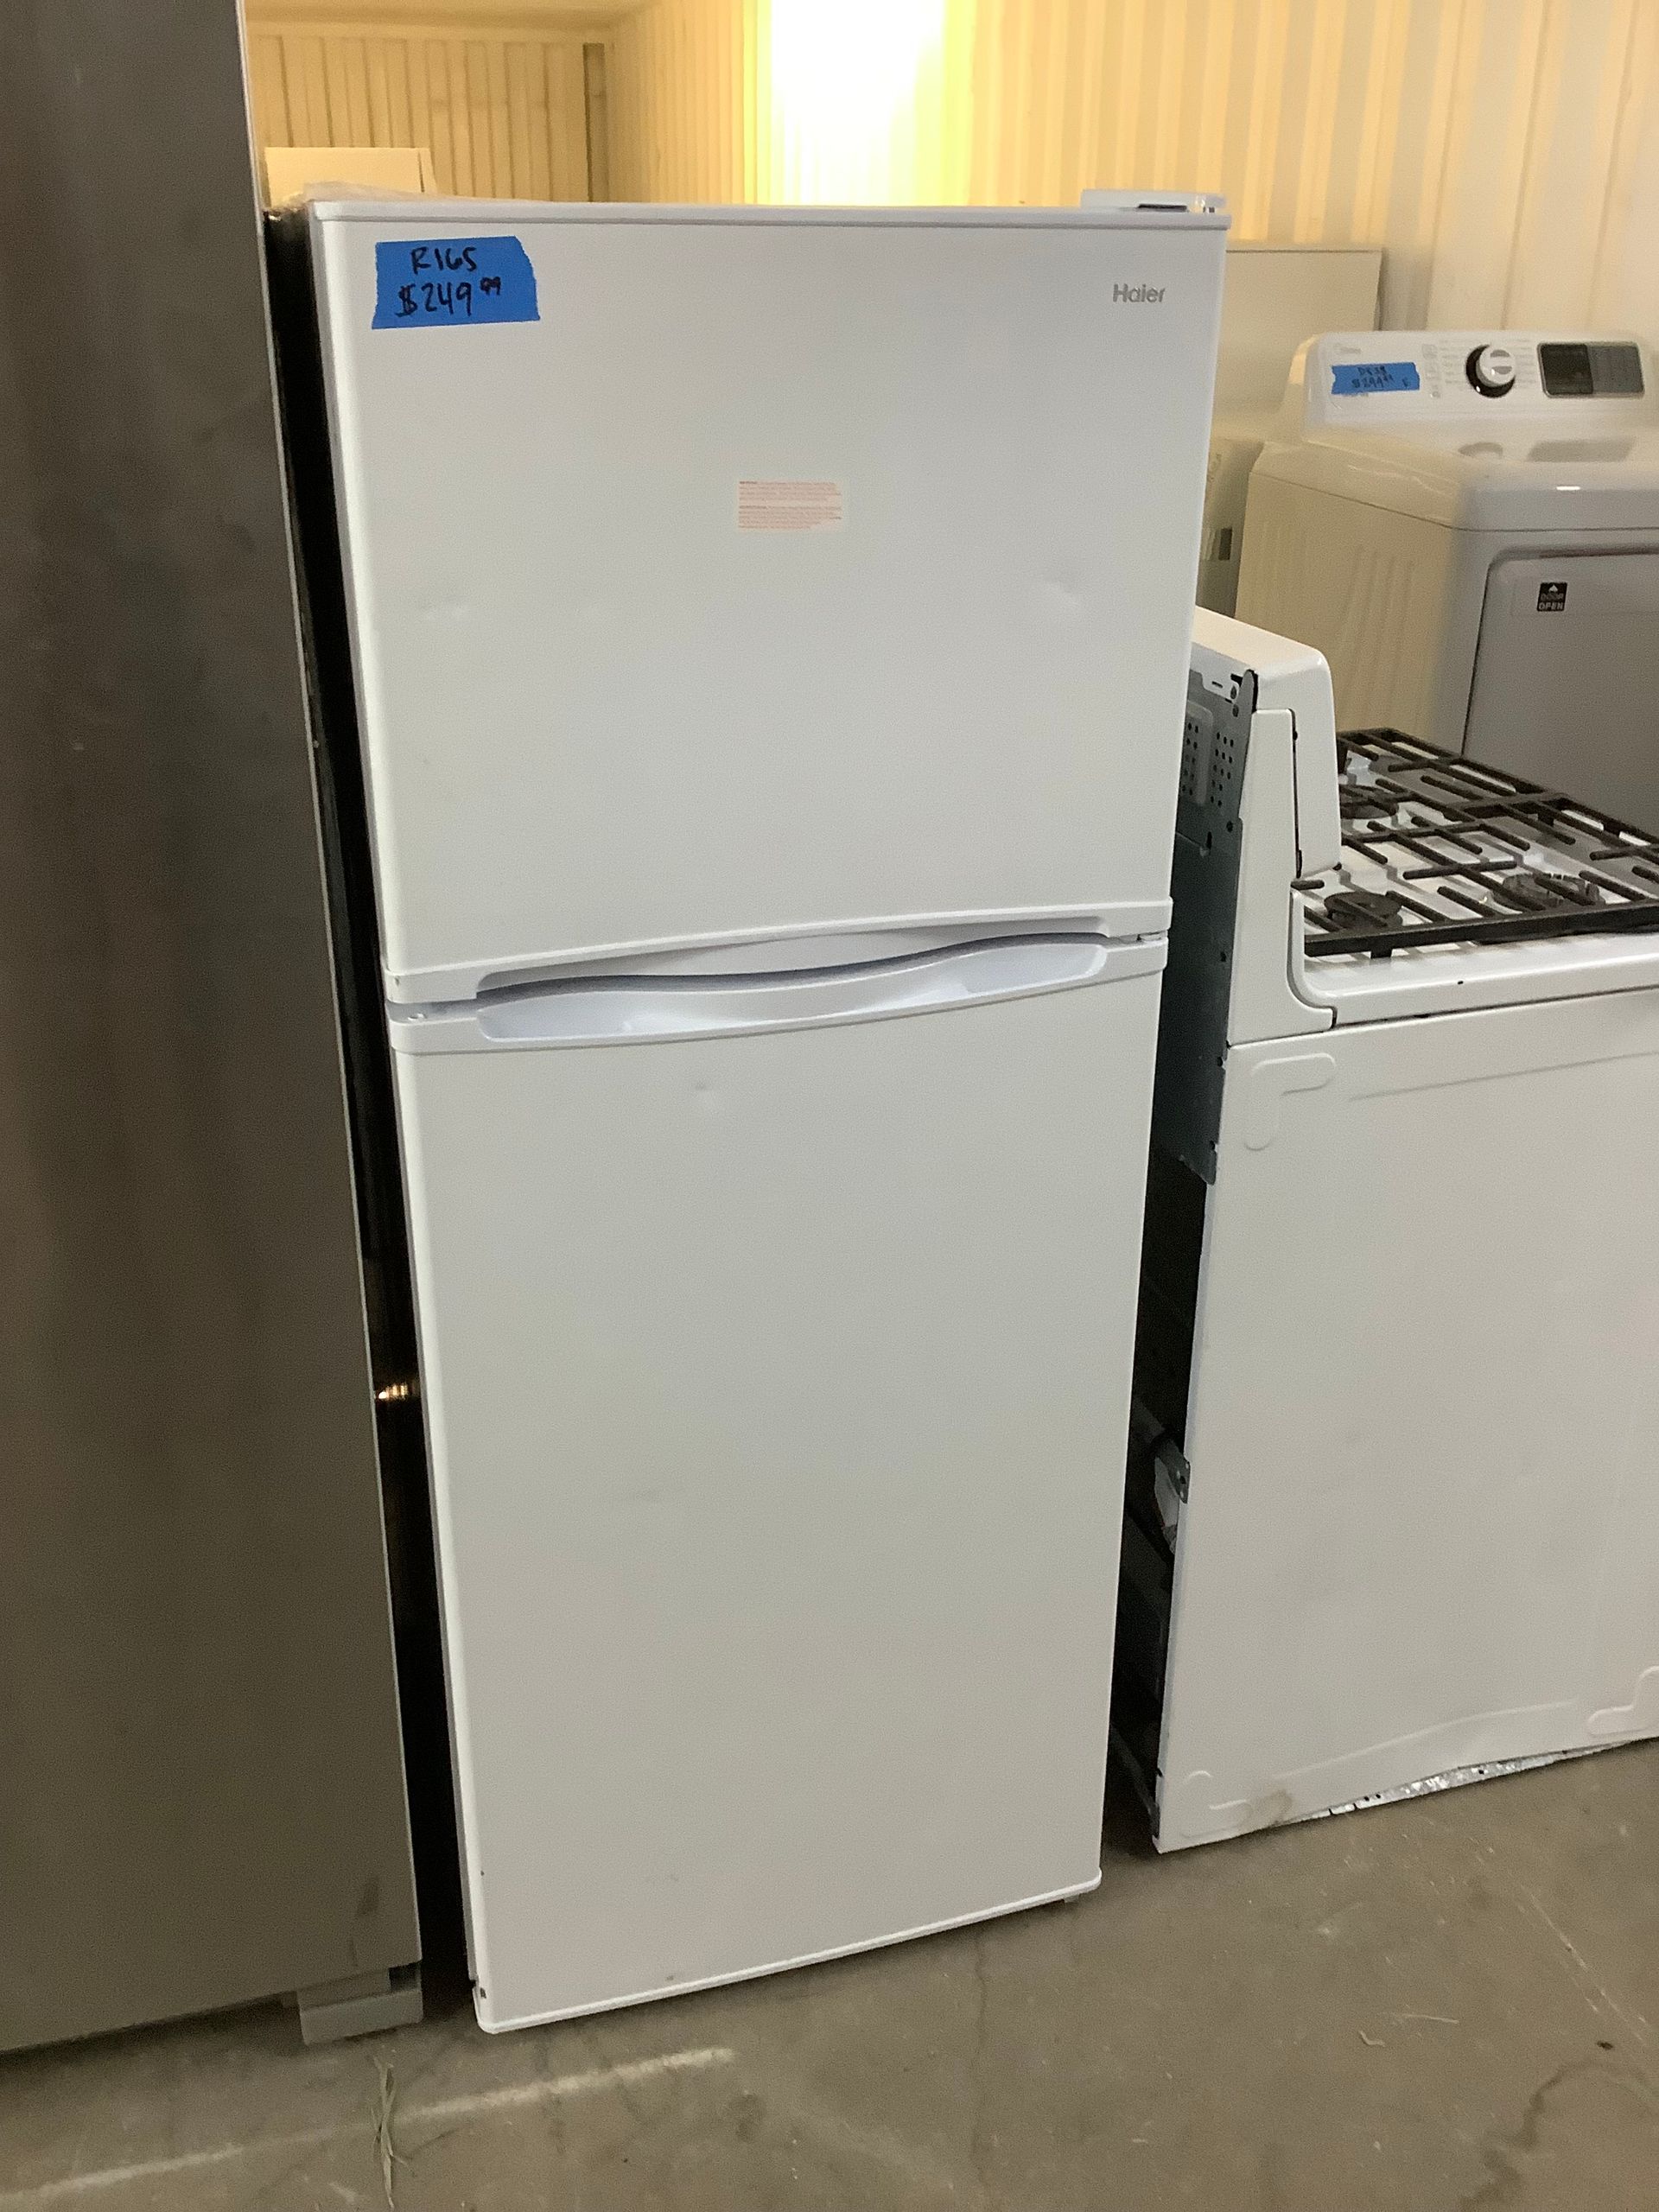 Houston Appliance Pre-Owned Quality Appliances at Great Prices Houston ...